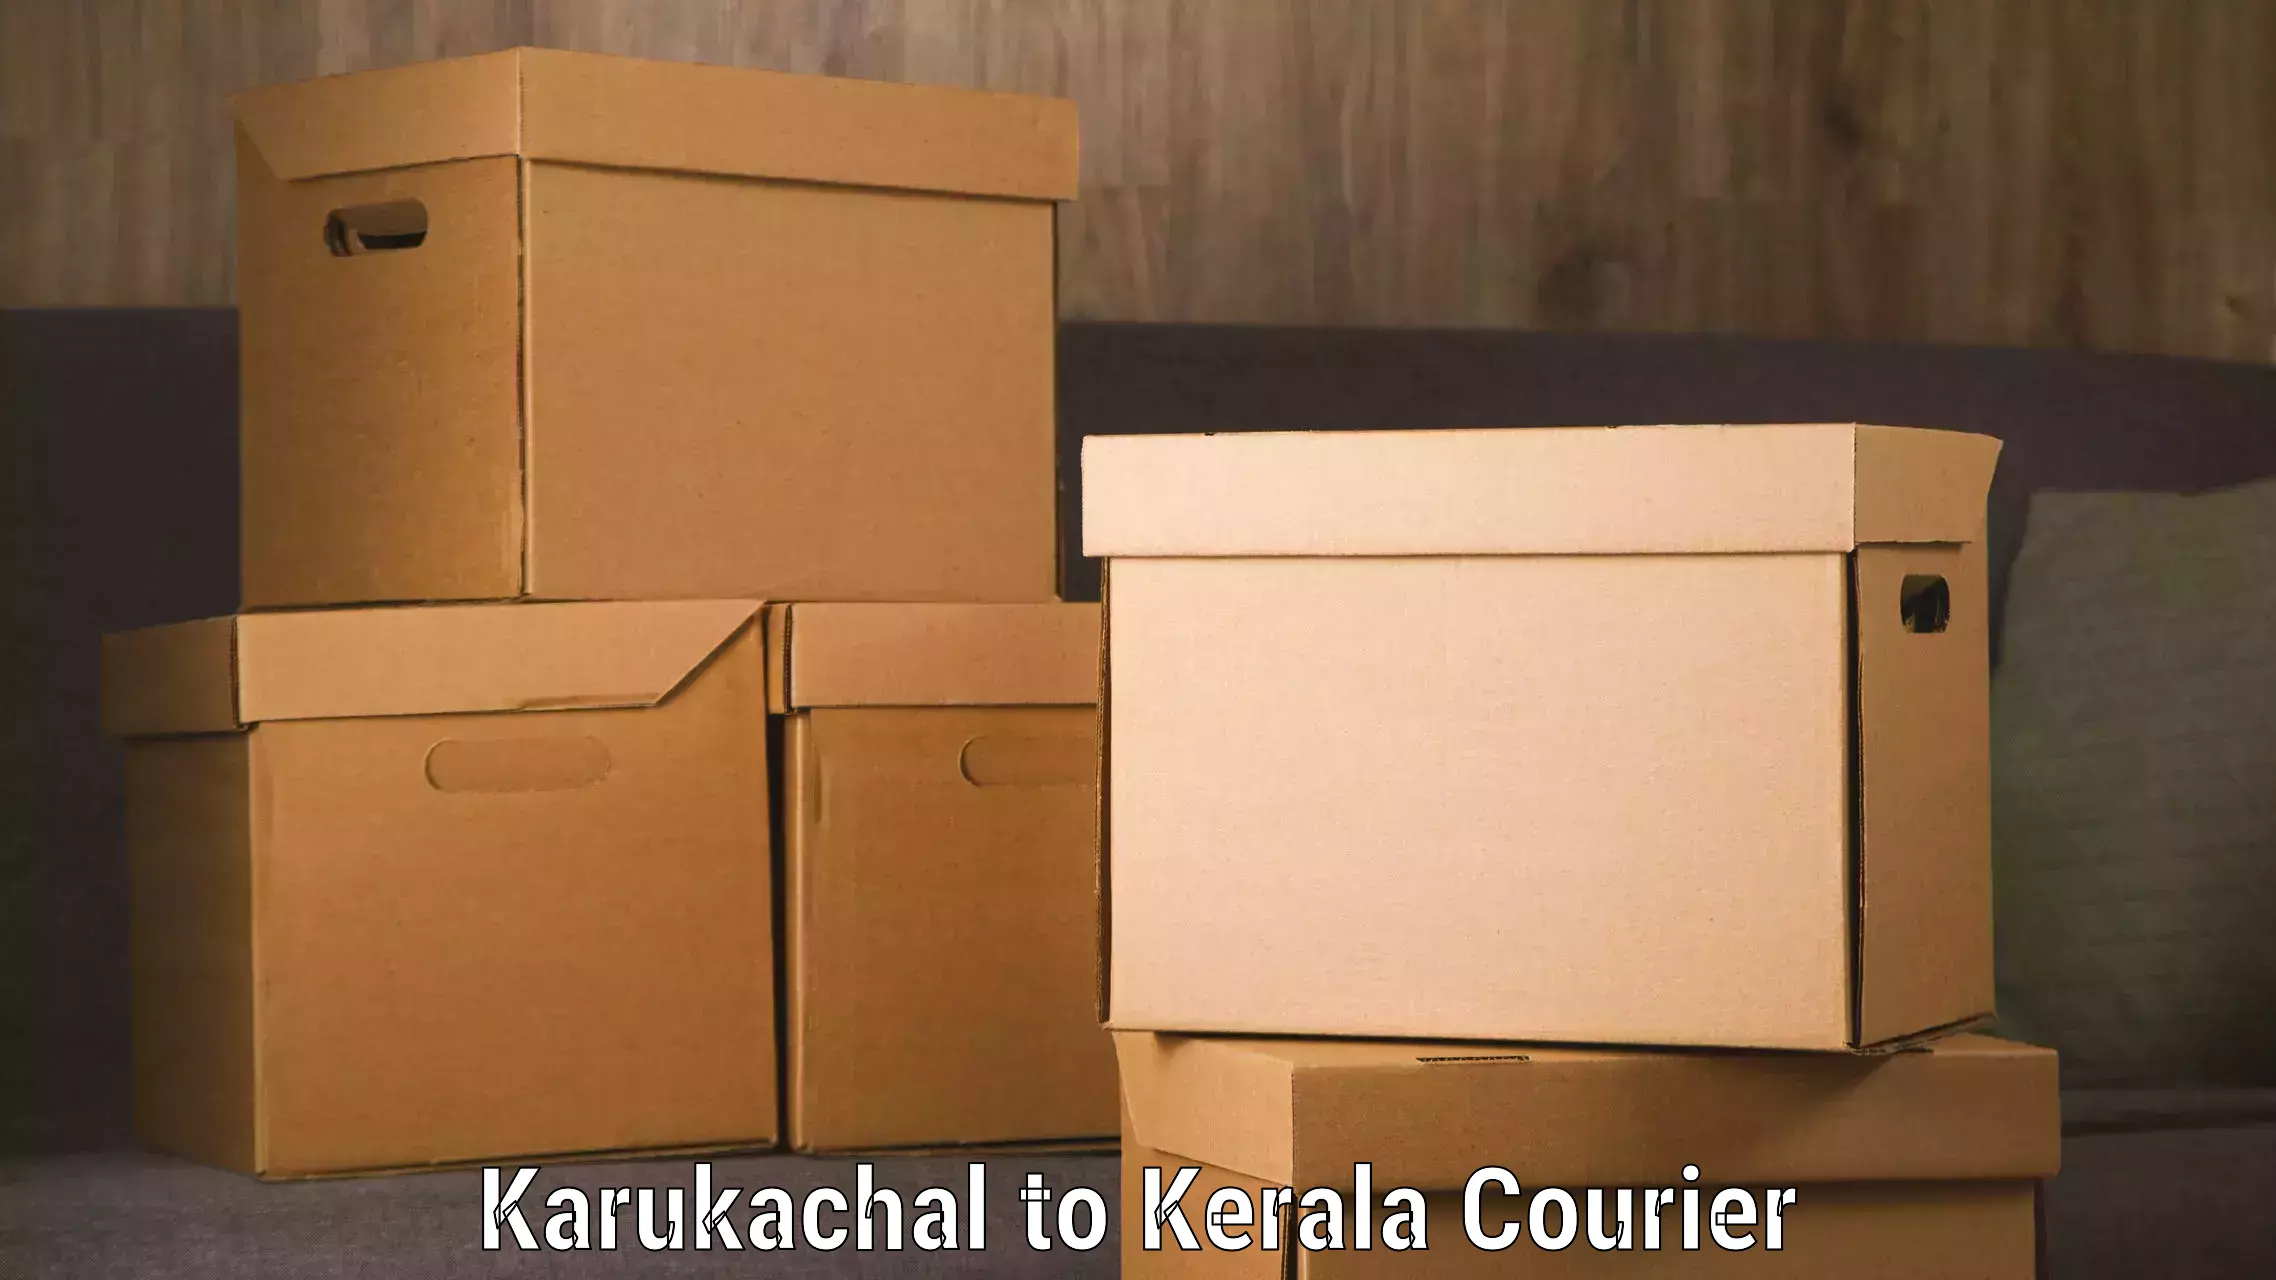 State-of-the-art courier technology Karukachal to Cochin University of Science and Technology